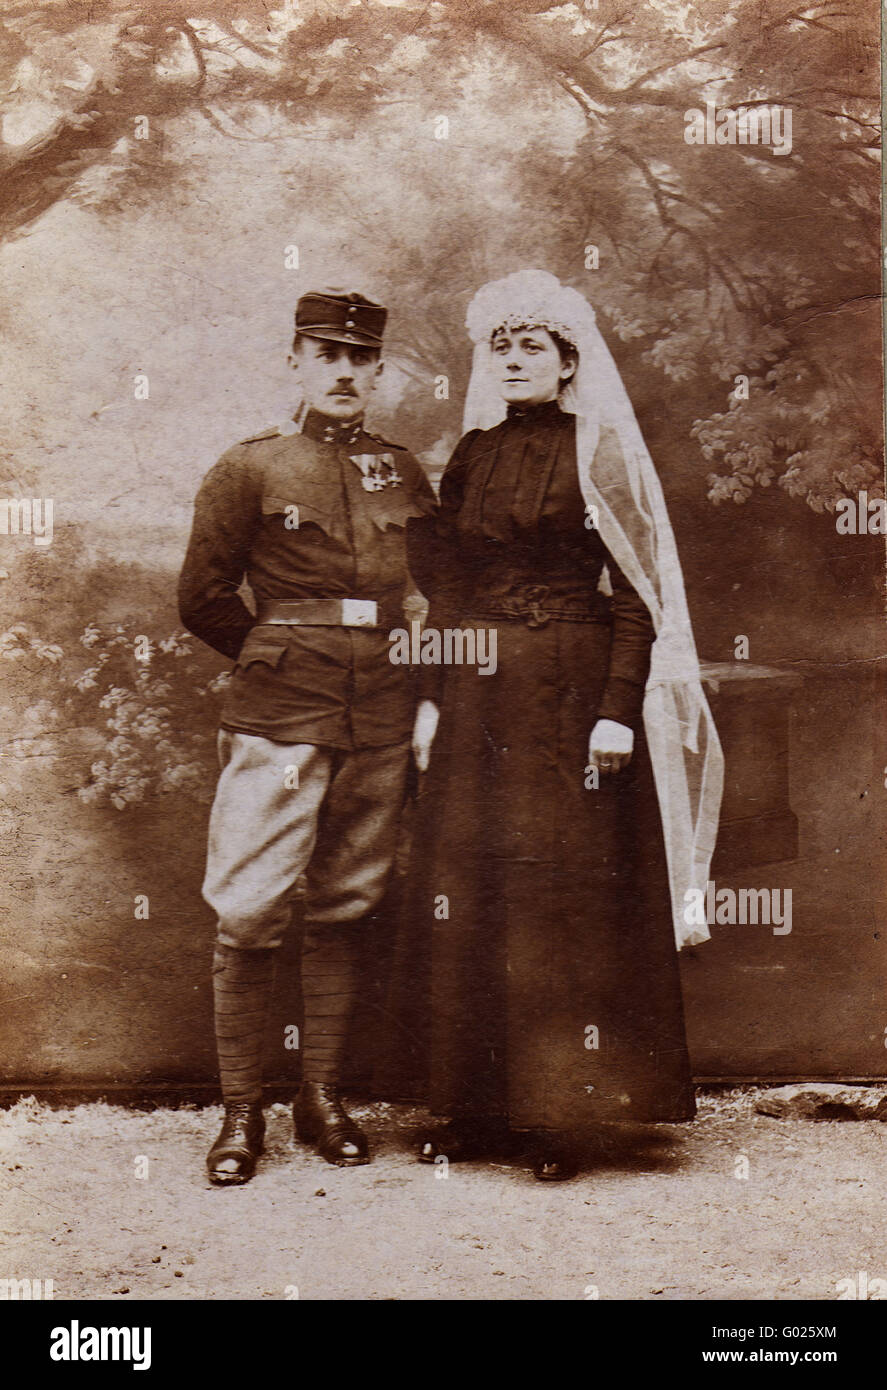 soldier with bride, historic photograph, around 1915 Stock Photo